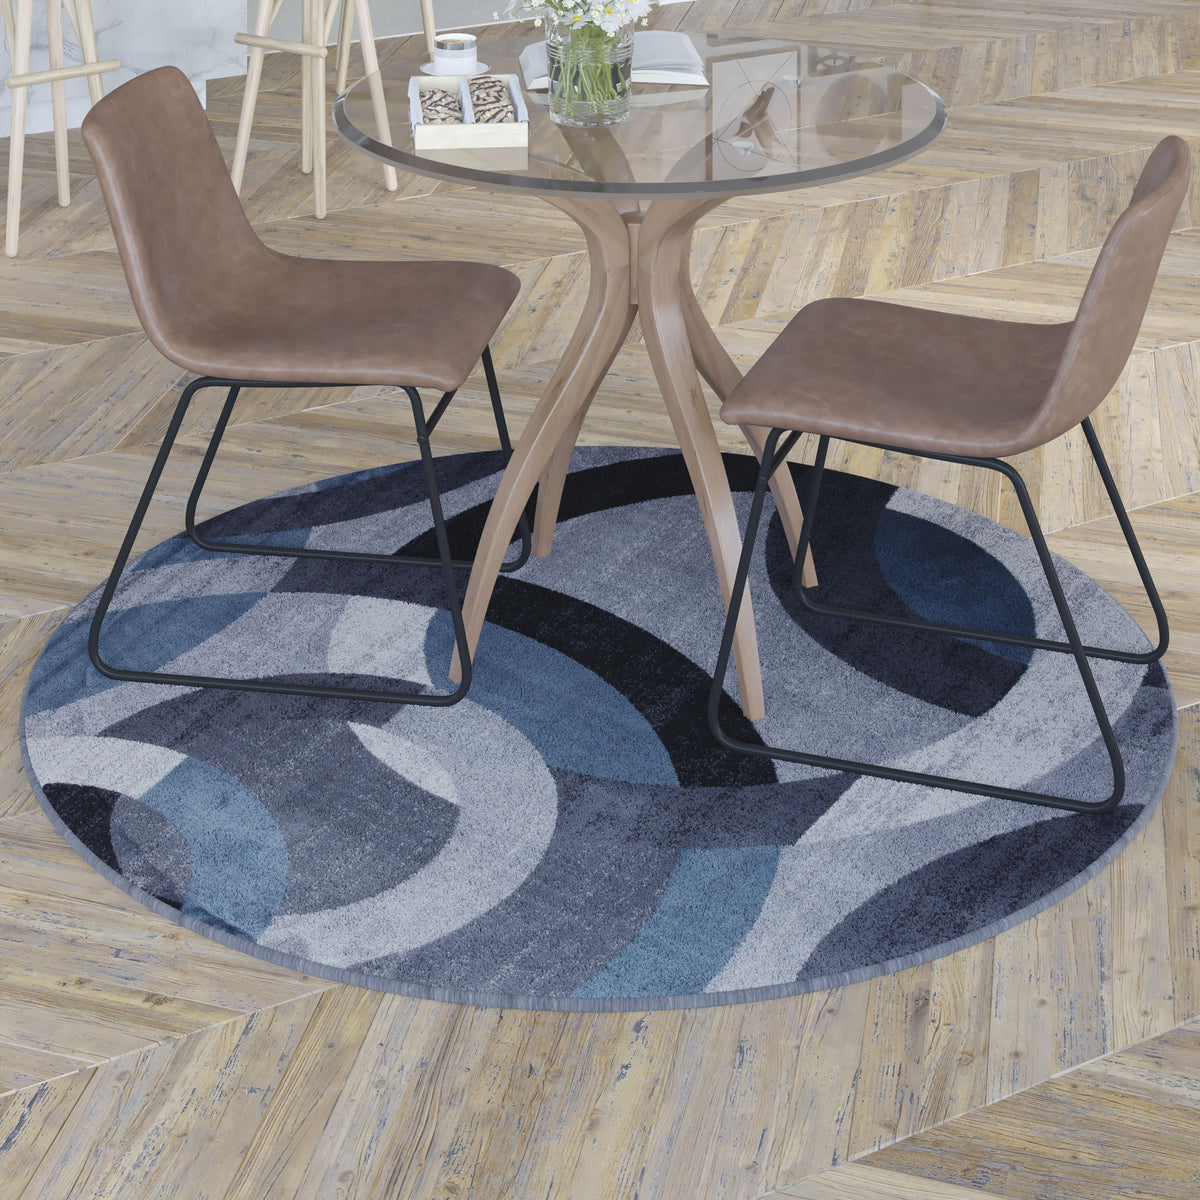 Blue,5' Round |#| Modern Round Geometric Design Area Rug in Blue, Gray, and White - 8' x 8'